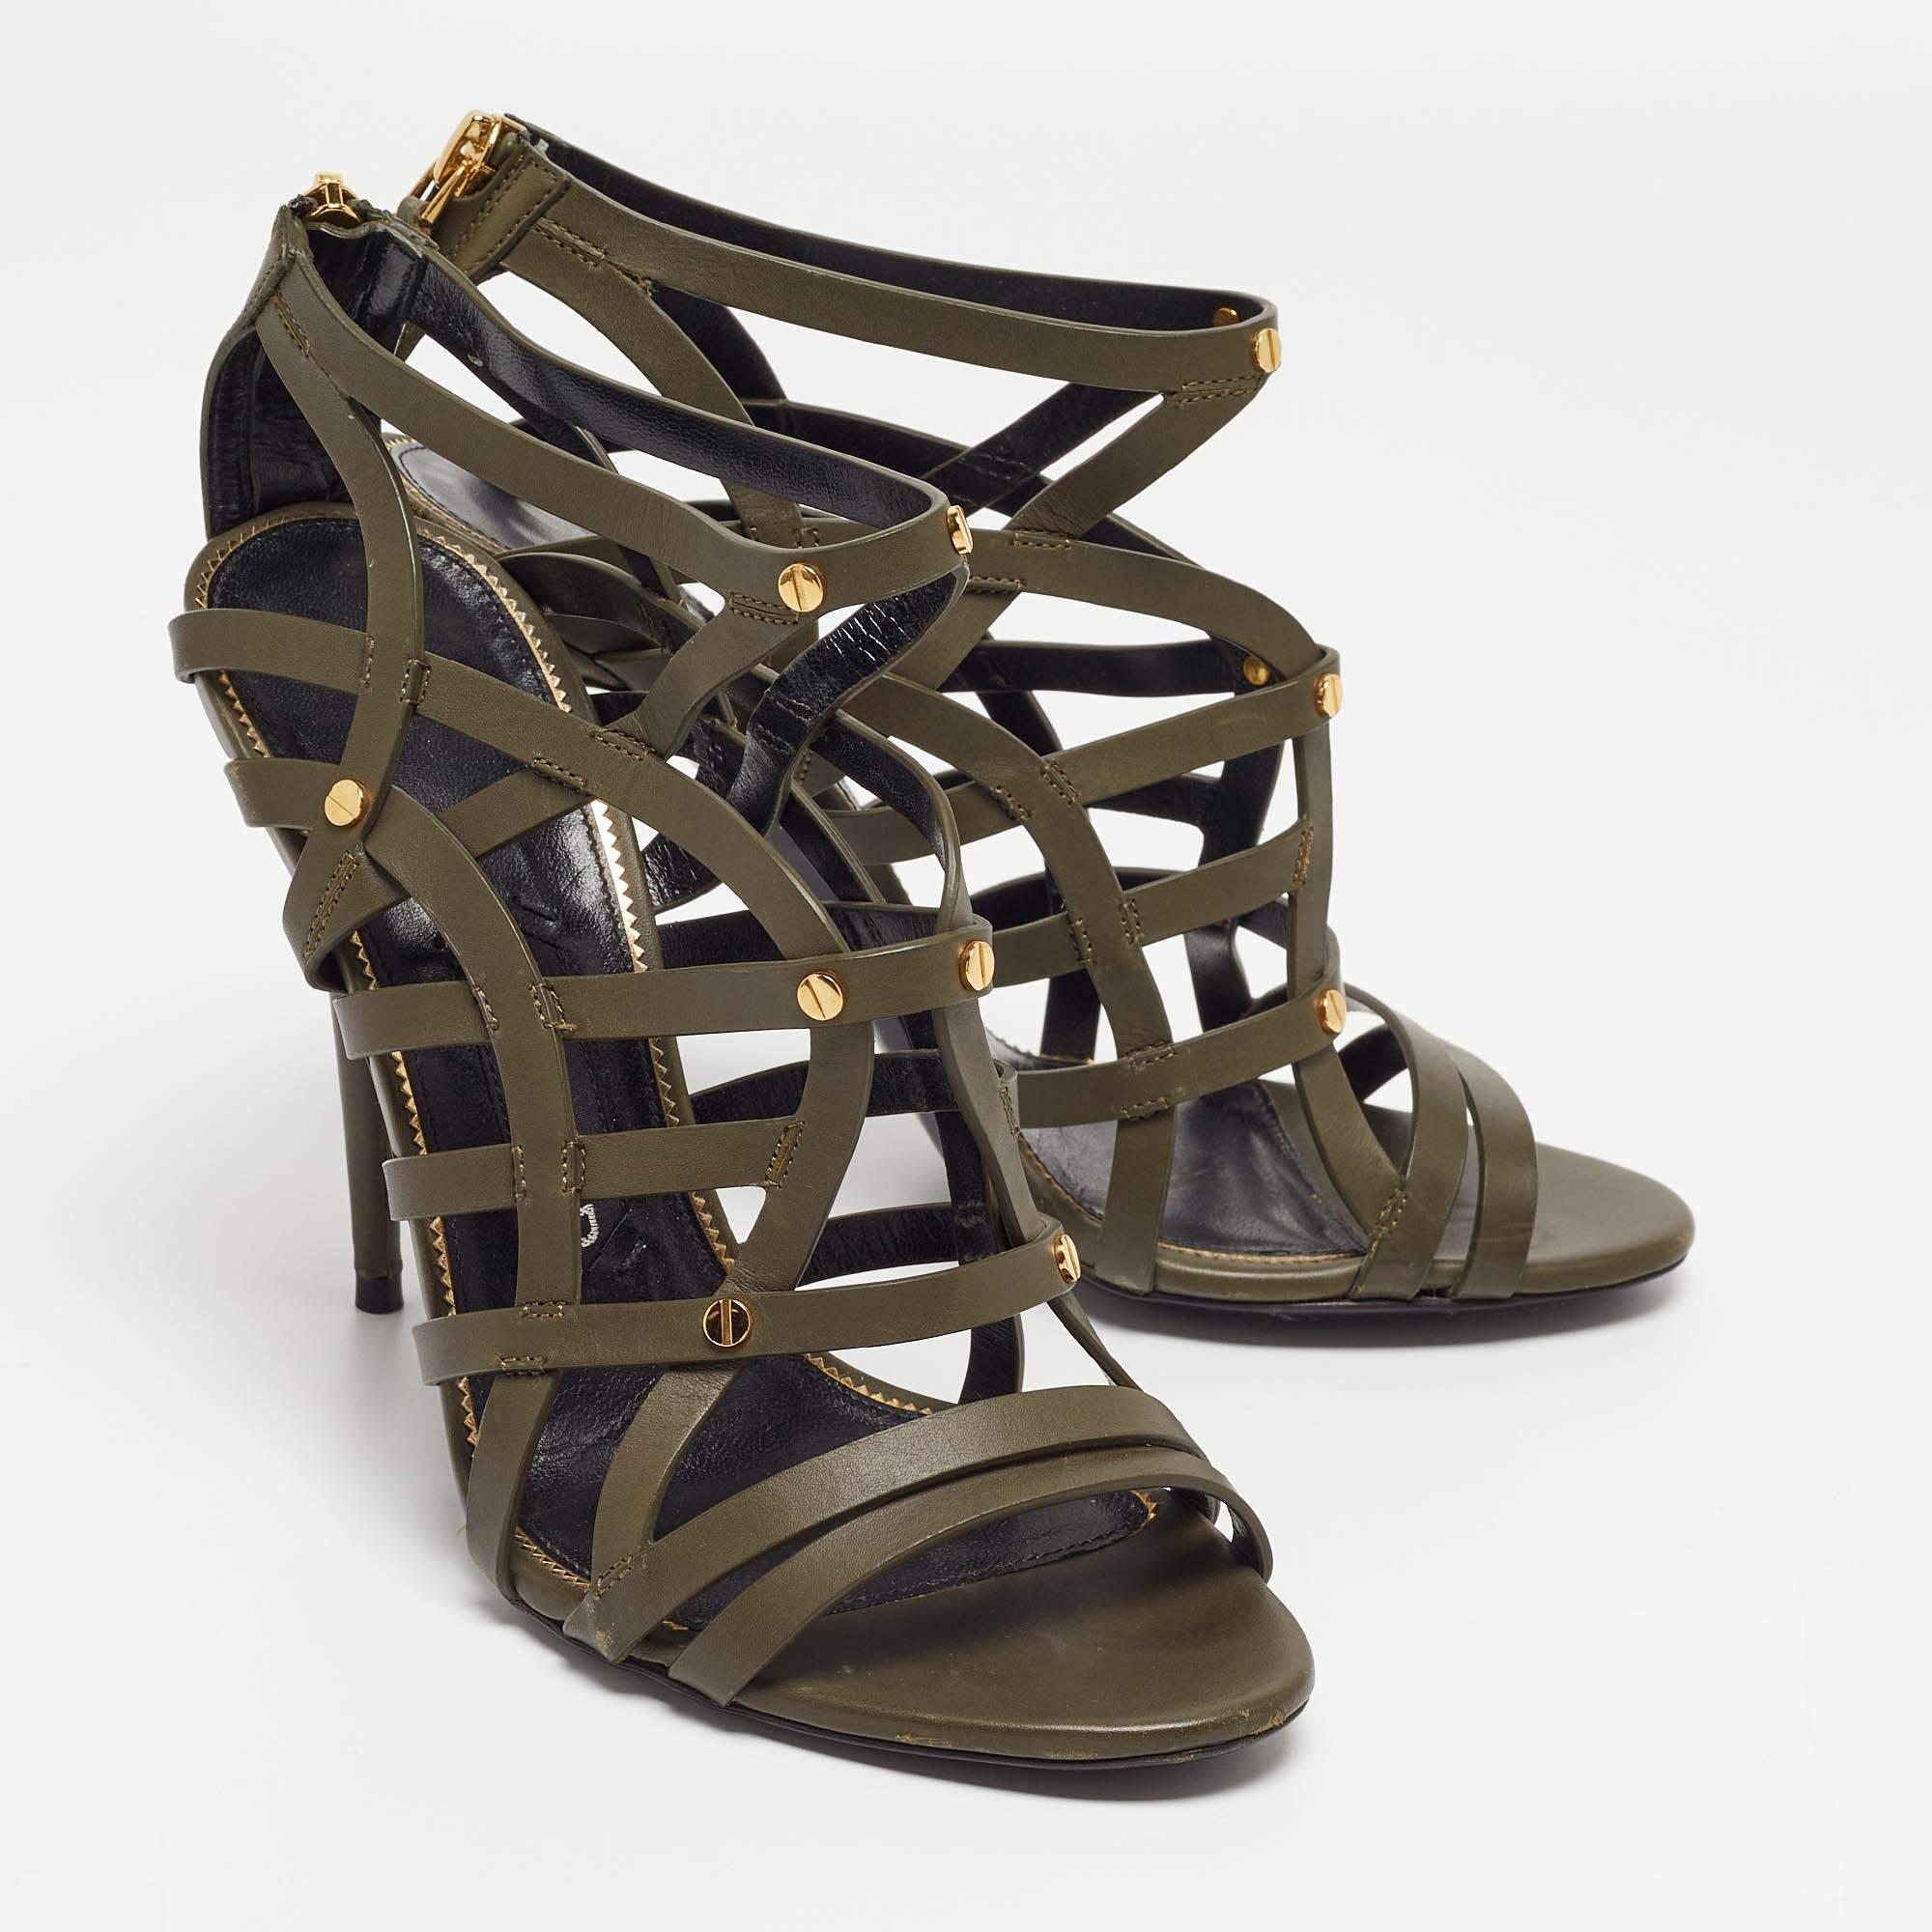 Tom Ford Army Green Leather Caged Sandals Size 38 In Good Condition For Sale In Dubai, Al Qouz 2